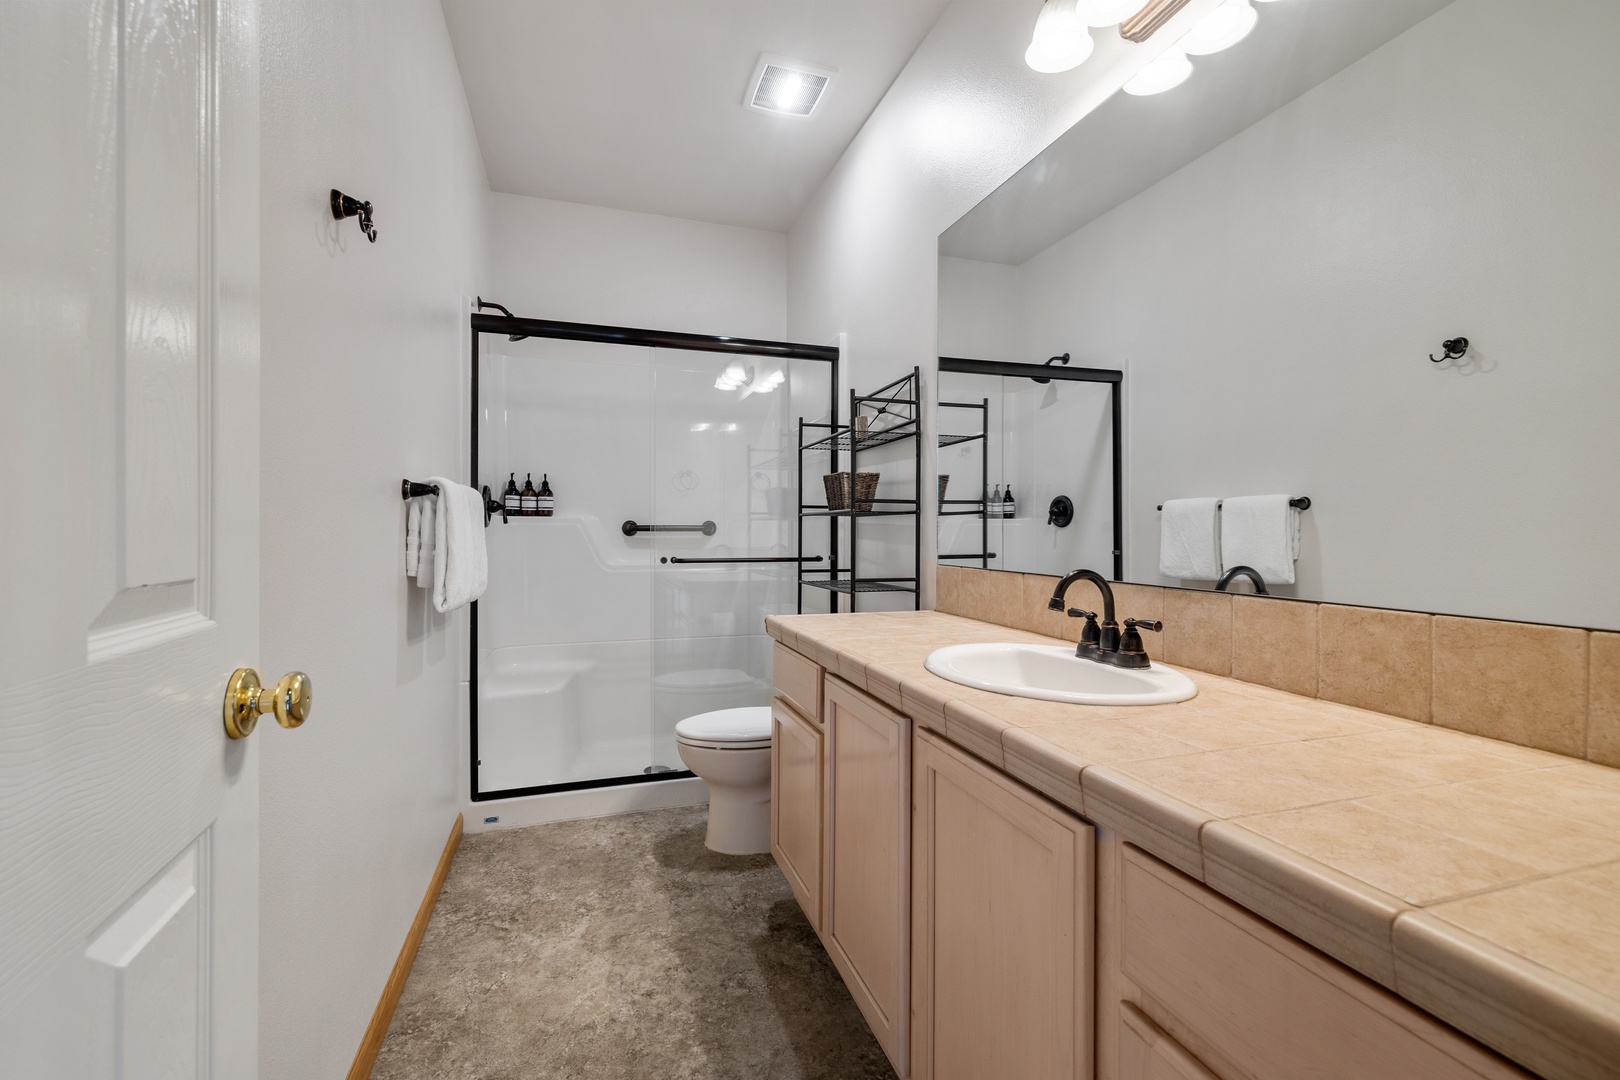 This 2nd floor bathroom offers a large single vanity & glass shower